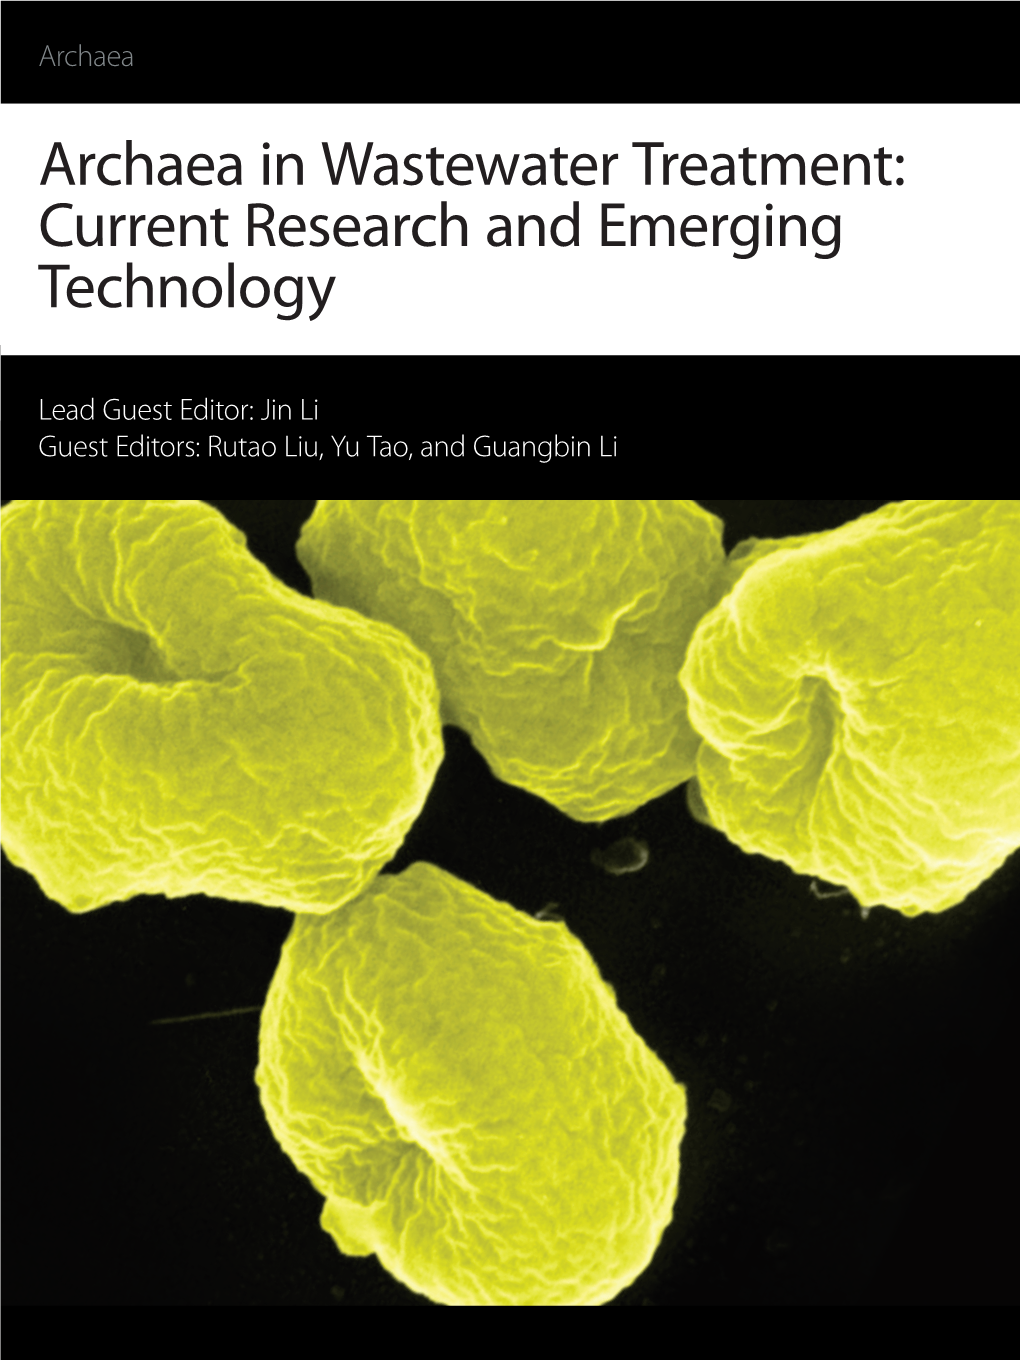 Archaea in Wastewater Treatment: Current Research and Emerging Technology